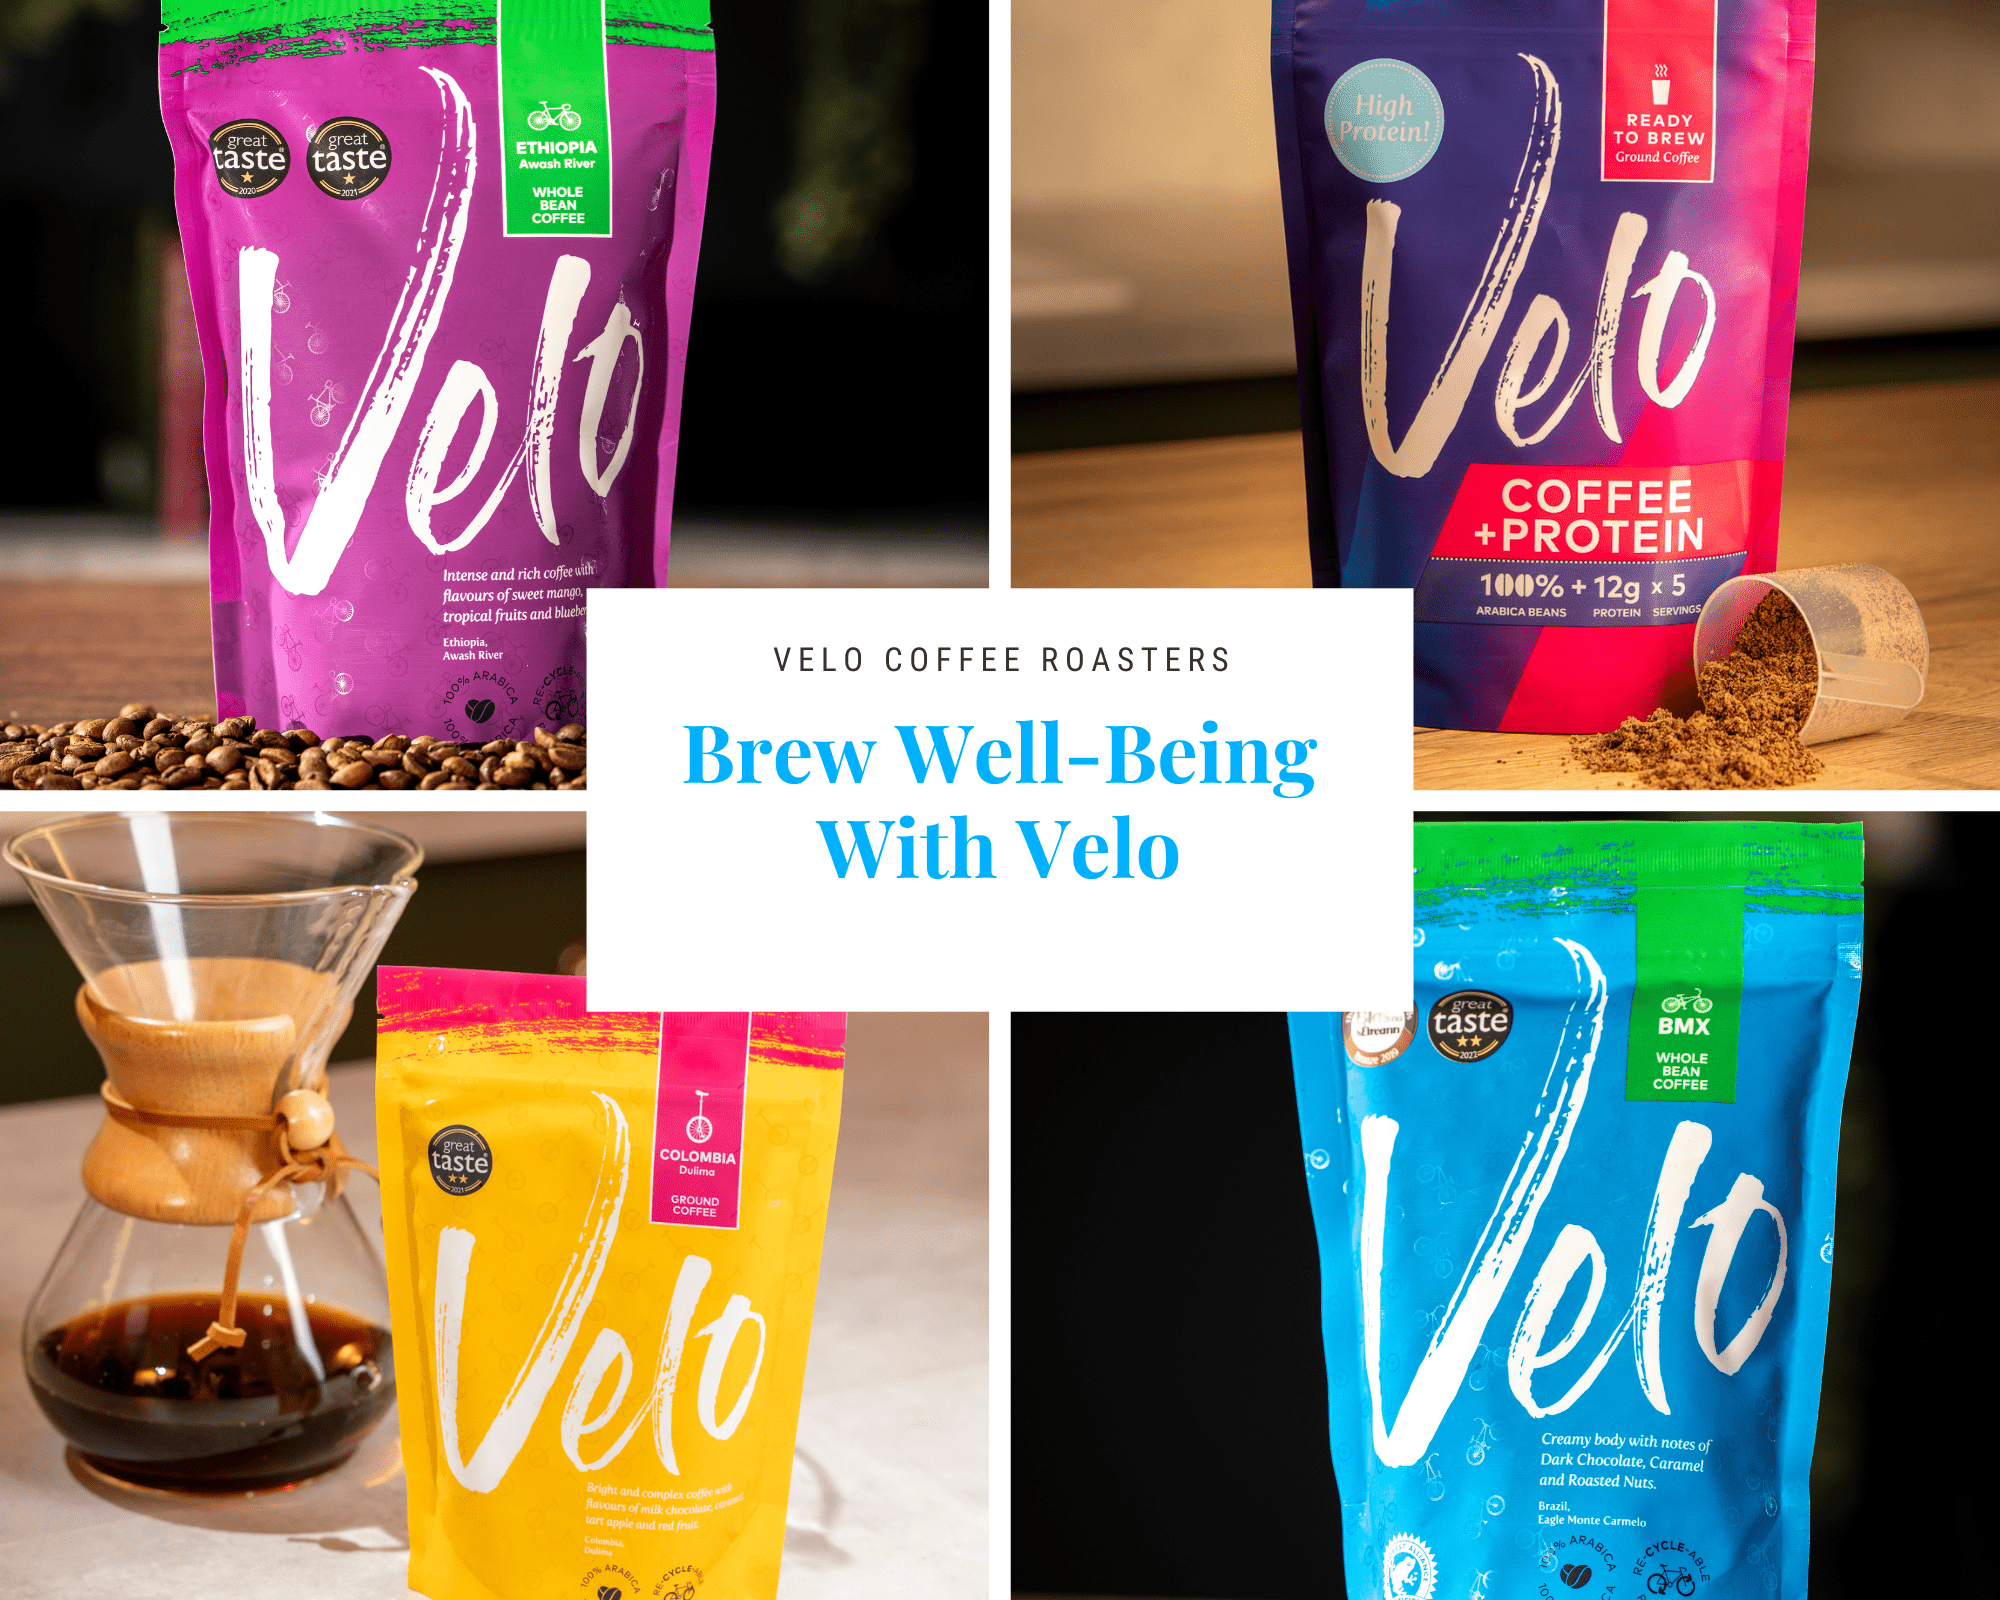 Brew Well-Being With Velo! - Velo Coffee Roasters